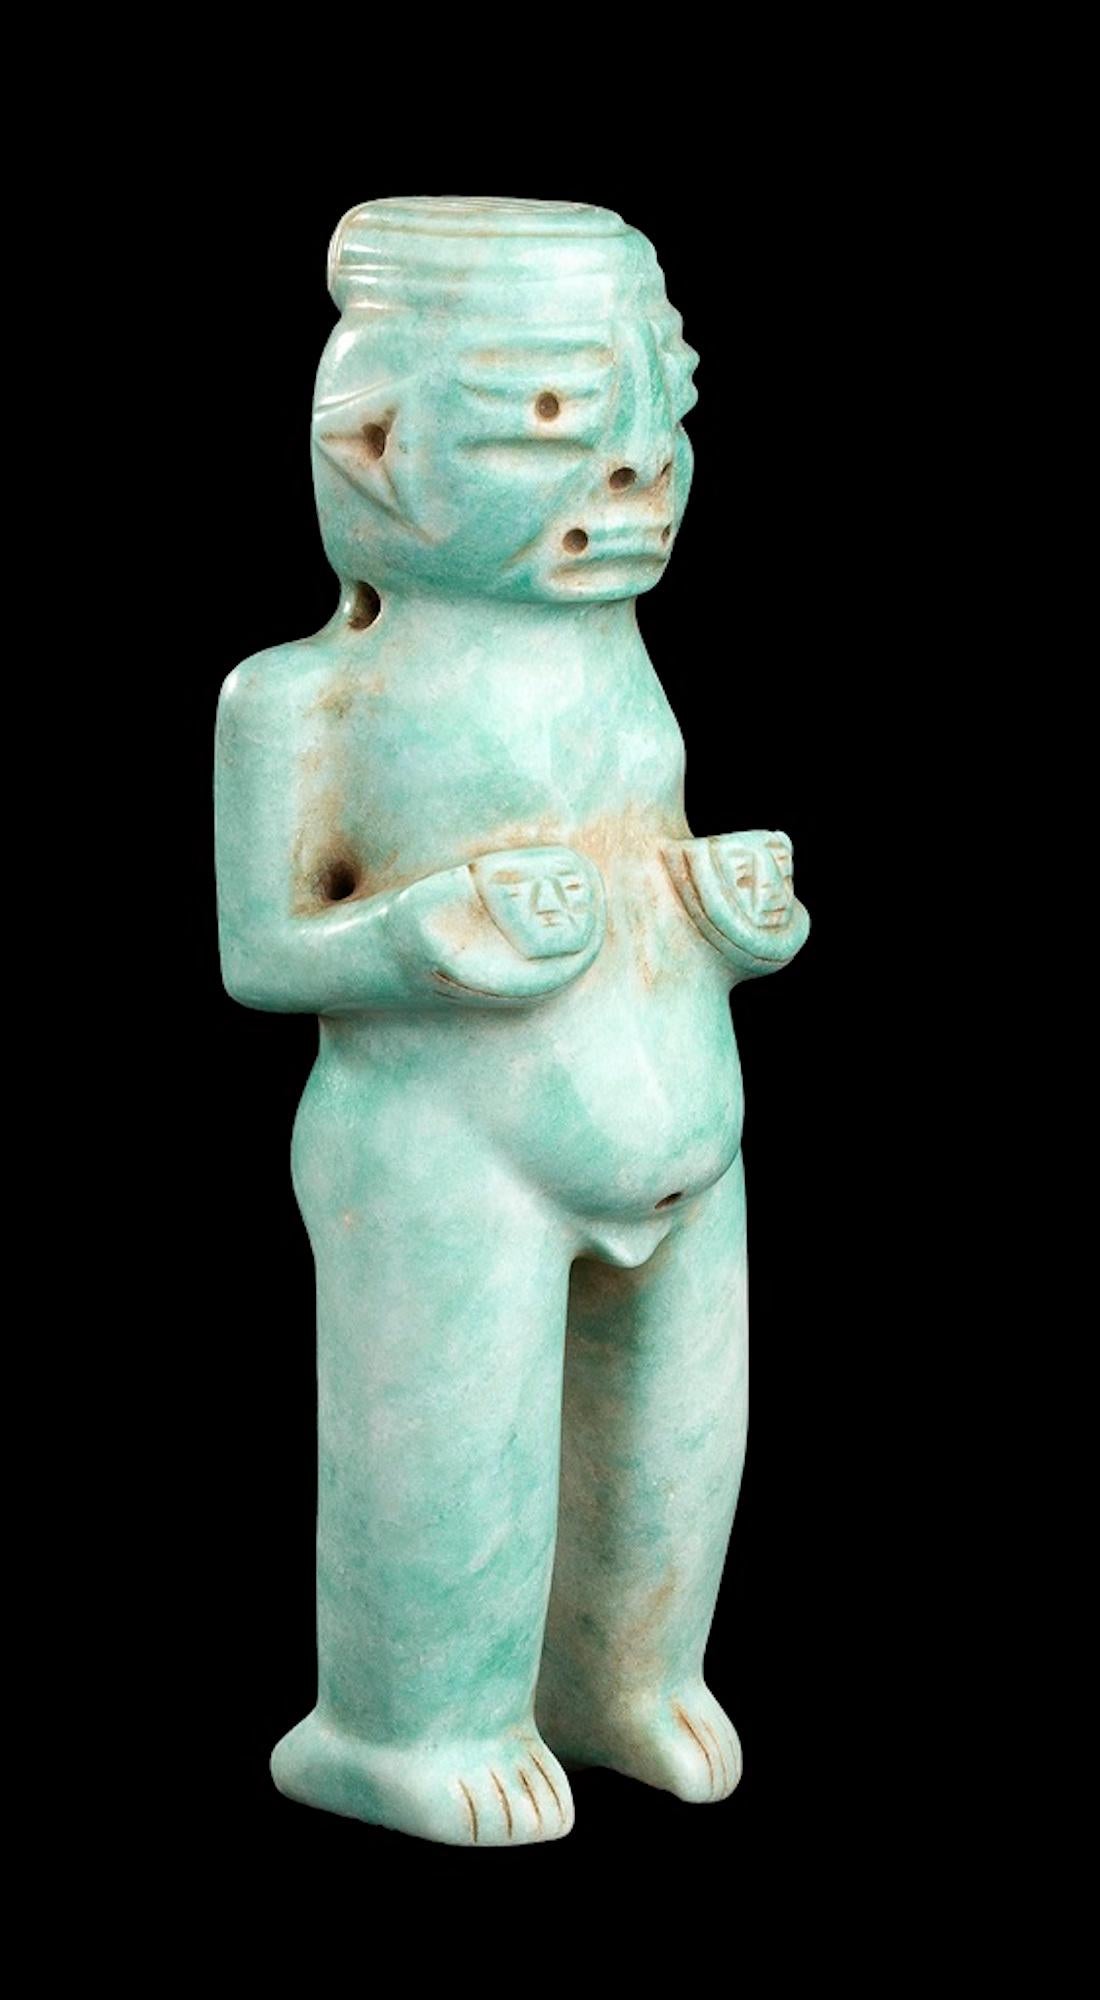 Water jade figure is an original Olmecs-style manufacture.

Green jade.

Good conditions.

Provenance: Giovanni Testori collection. 

Beautiful and brilliant small green jade sculpture realized in a typical Olmecs style. The 